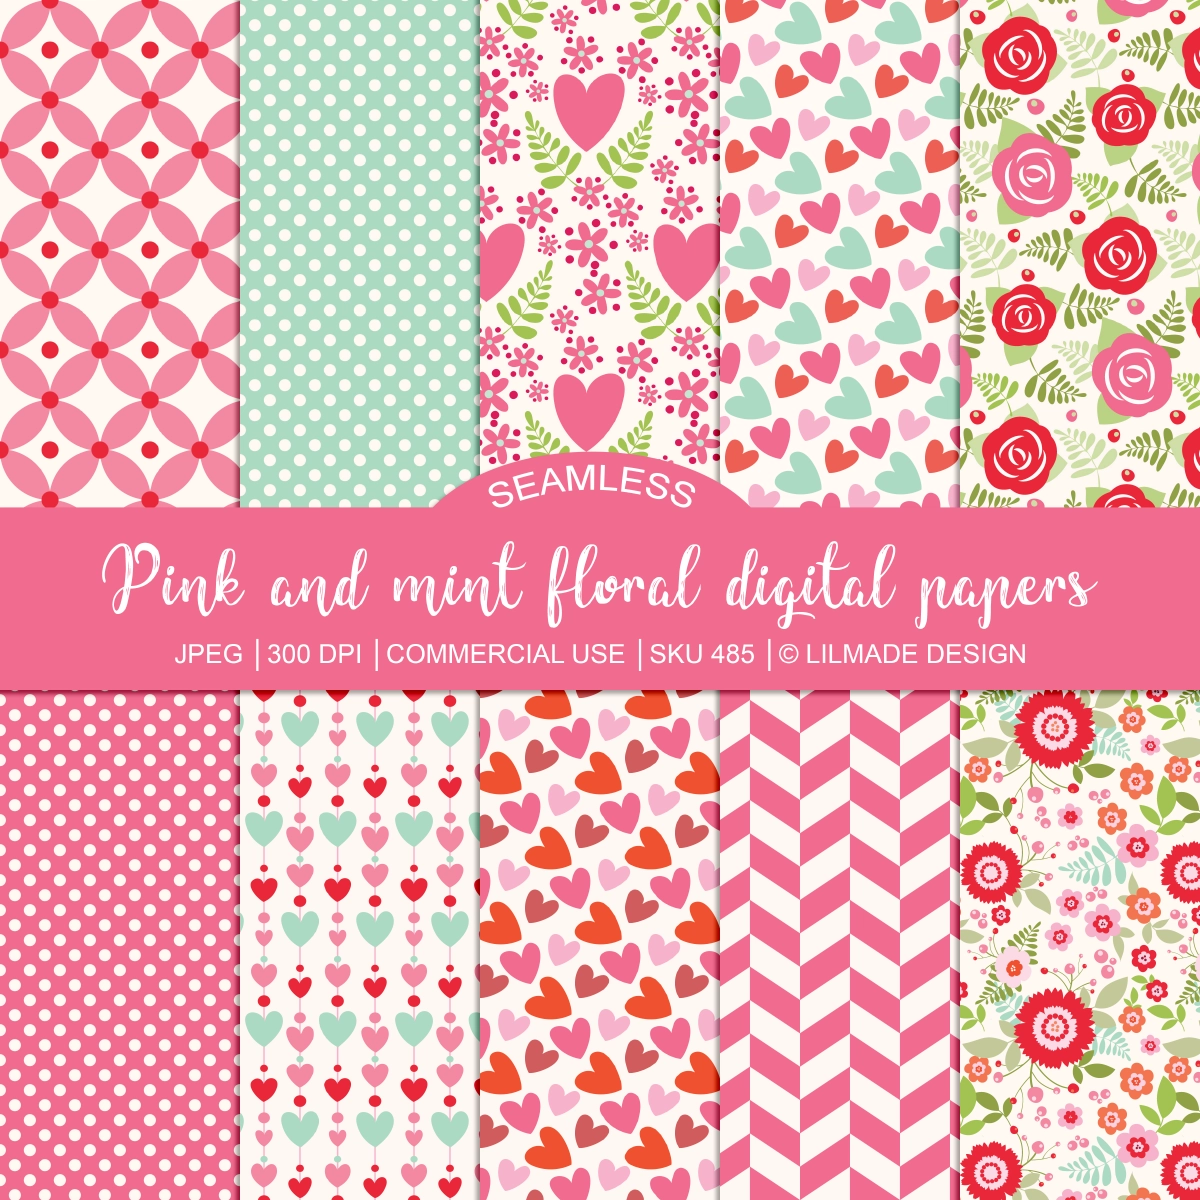 New seamless pink and mint floral and geometric digital scrapbook paper